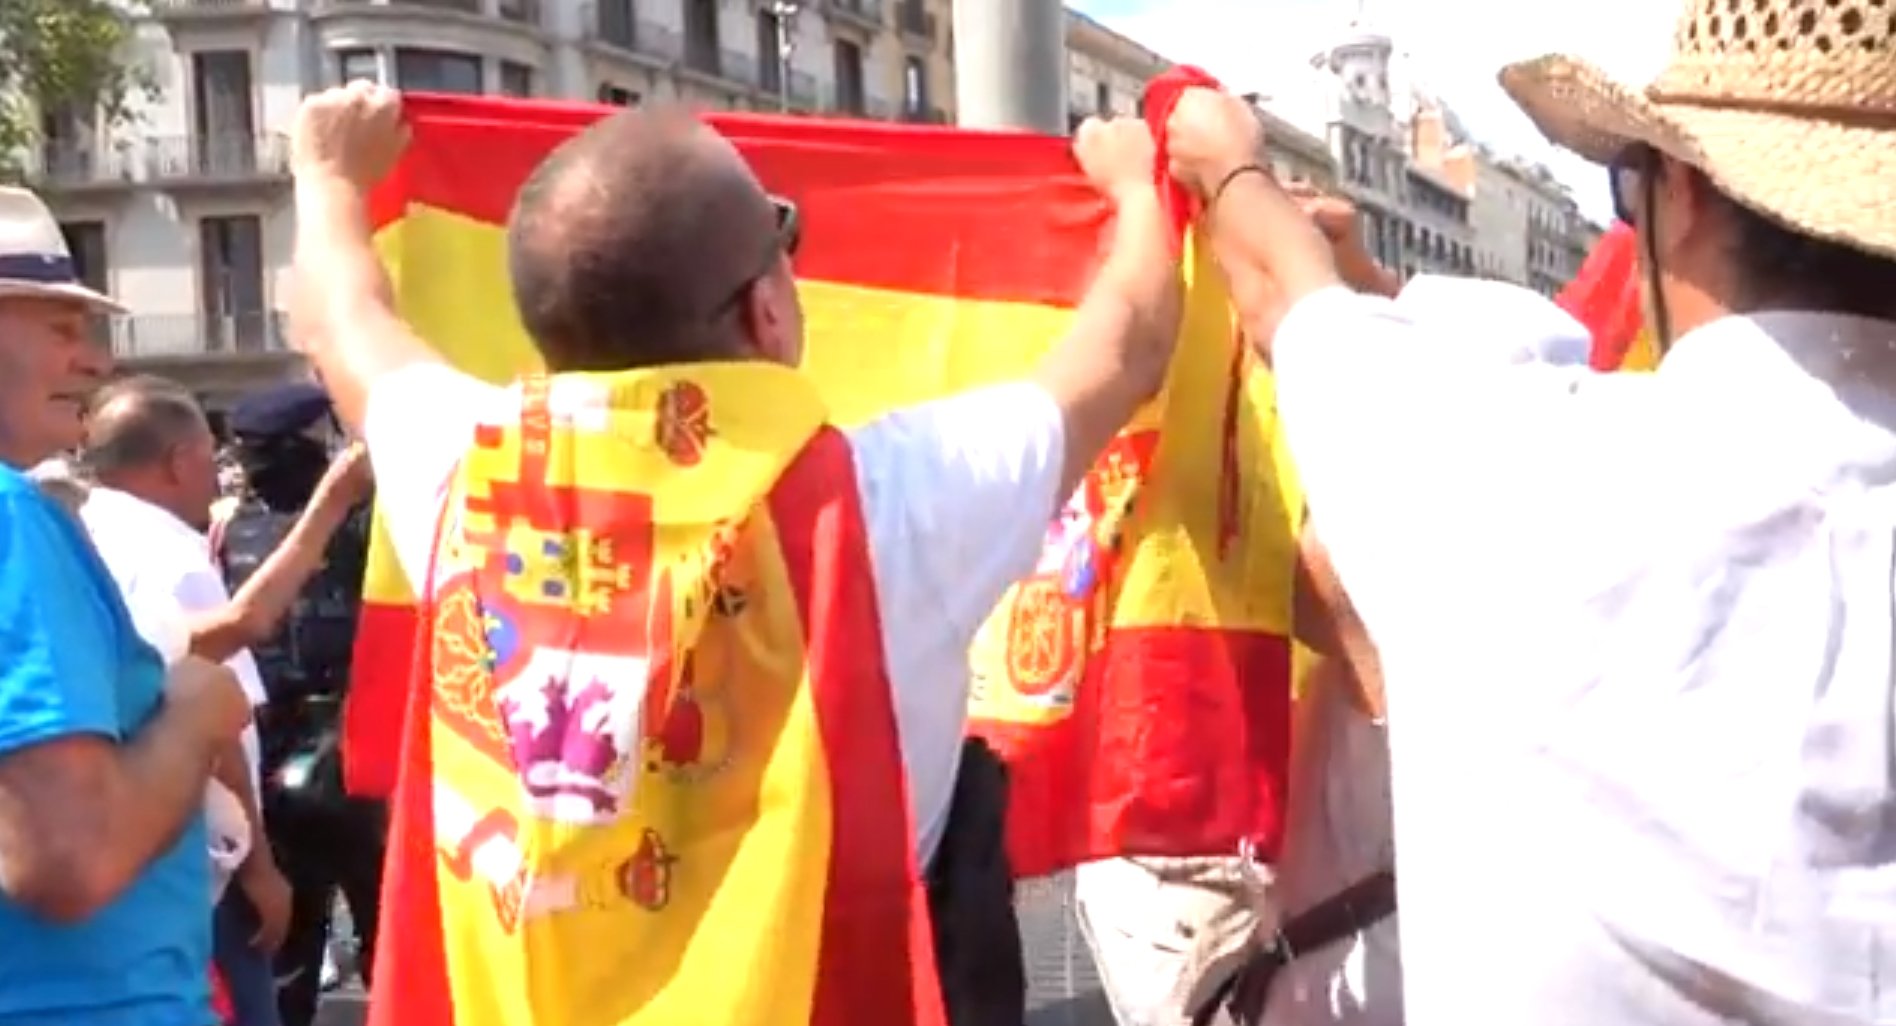 Insults unionistes contra els independentistes